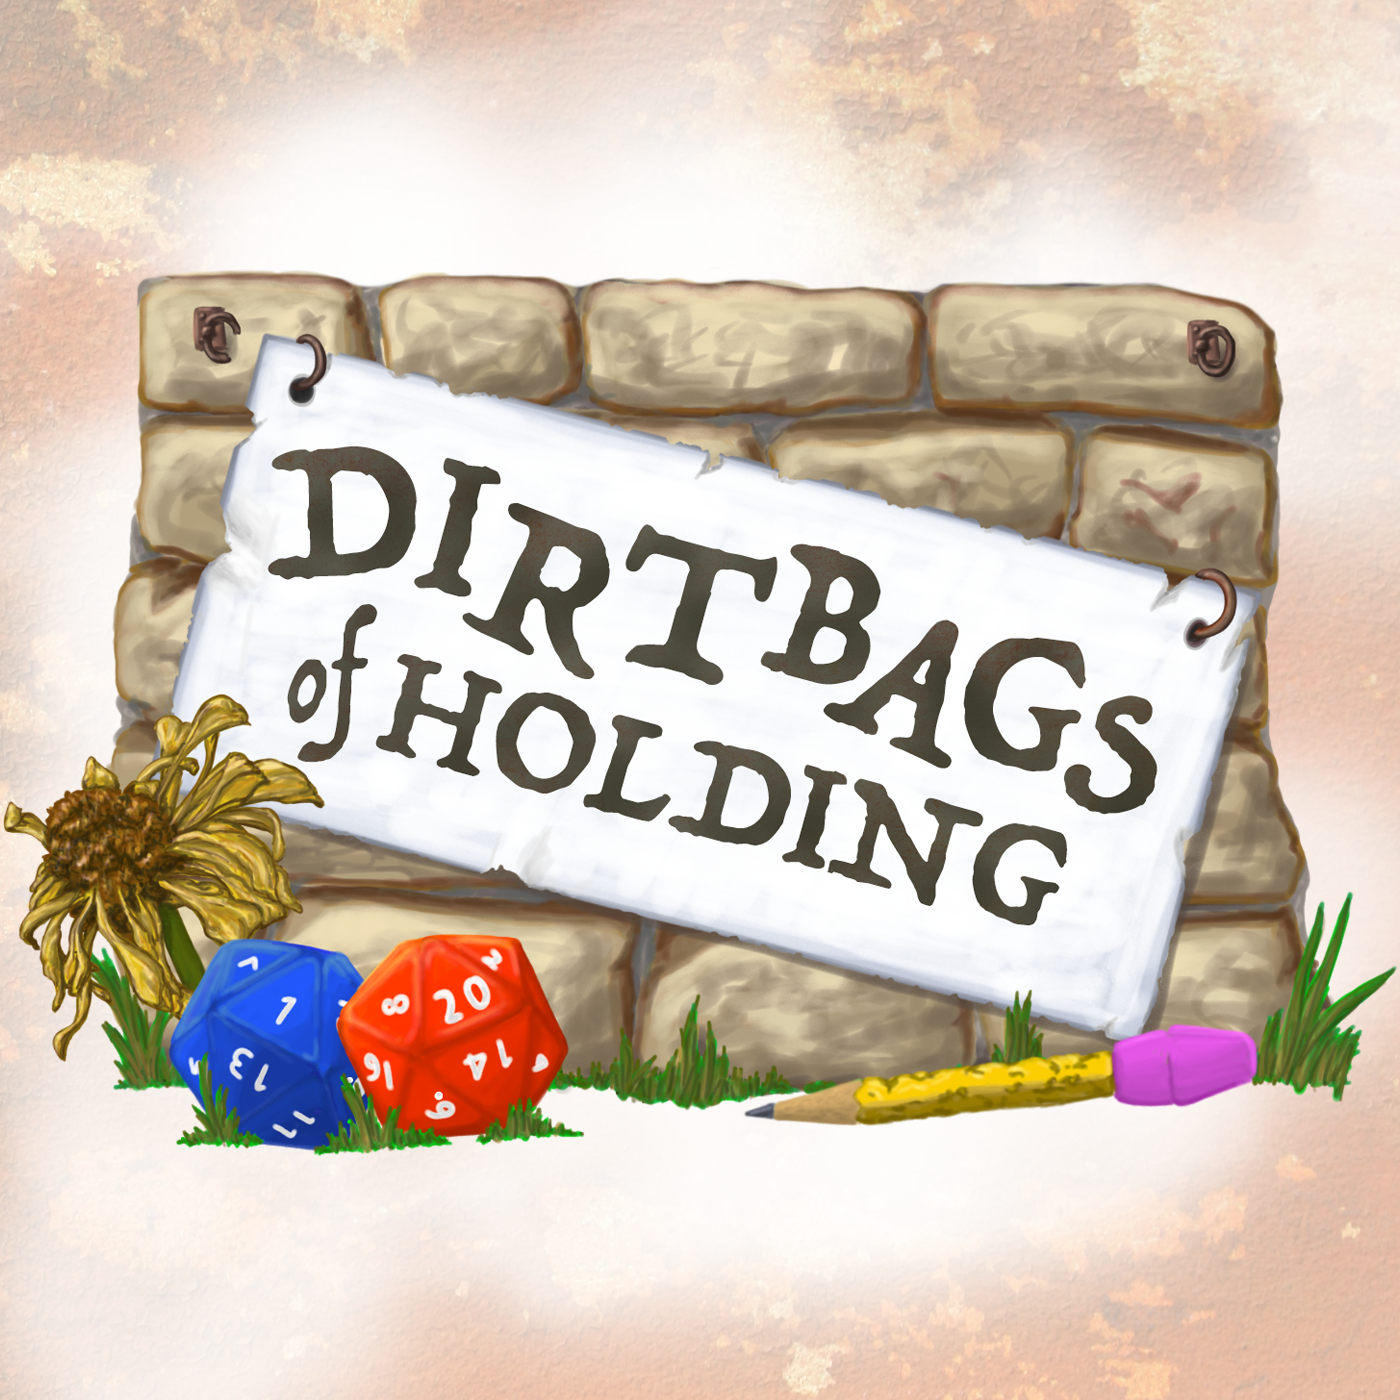 The Dirtbags of Holding